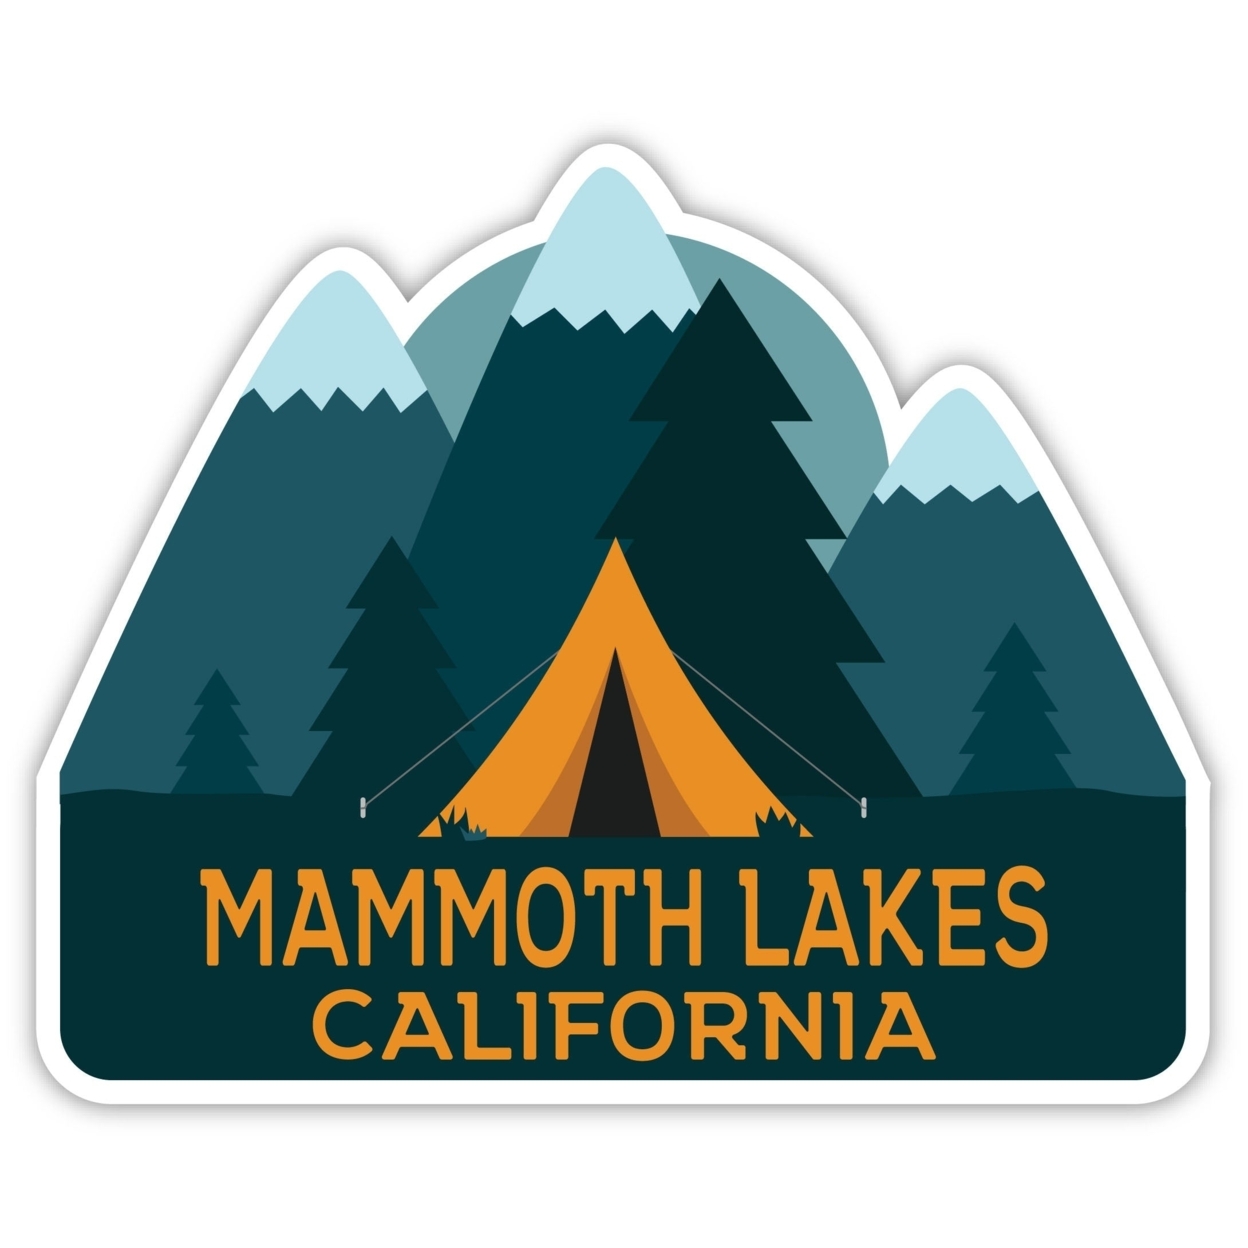 Mammoth Lakes California Souvenir Decorative Stickers (Choose Theme And Size) - 4-Inch, Adventures Awaits